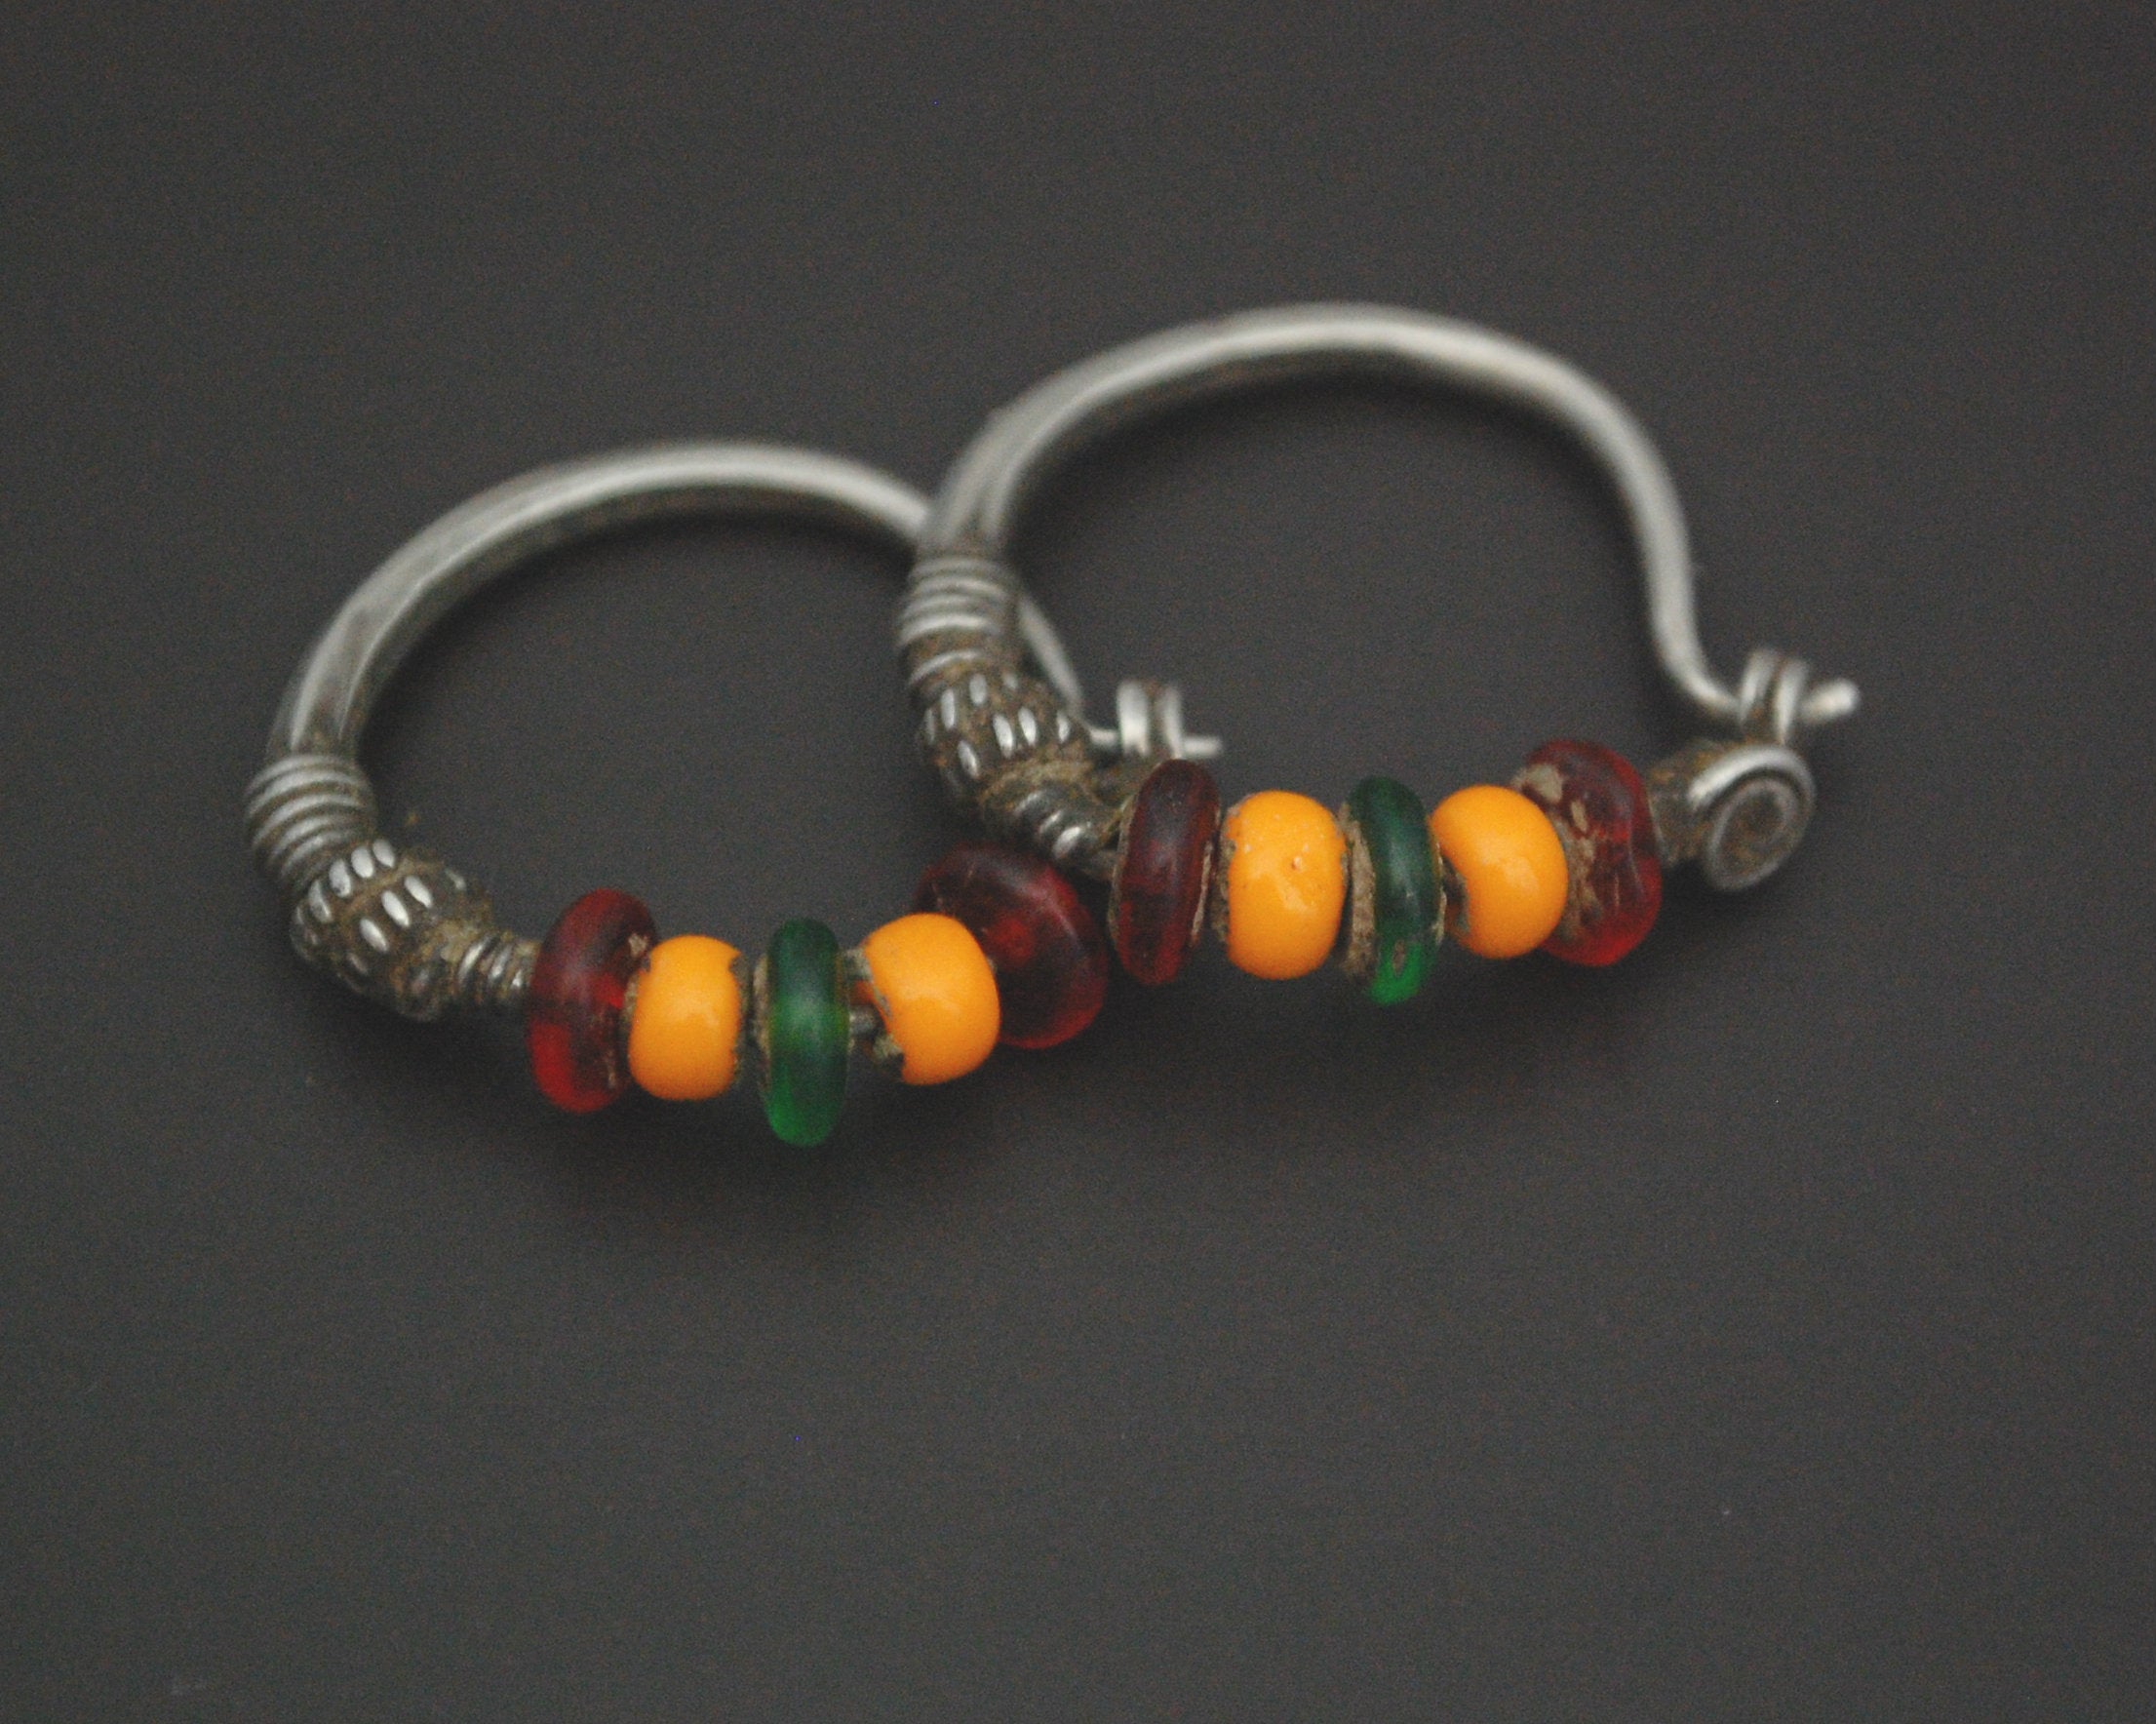 Tribal Indian Hoop Earrings with Colorful Beads